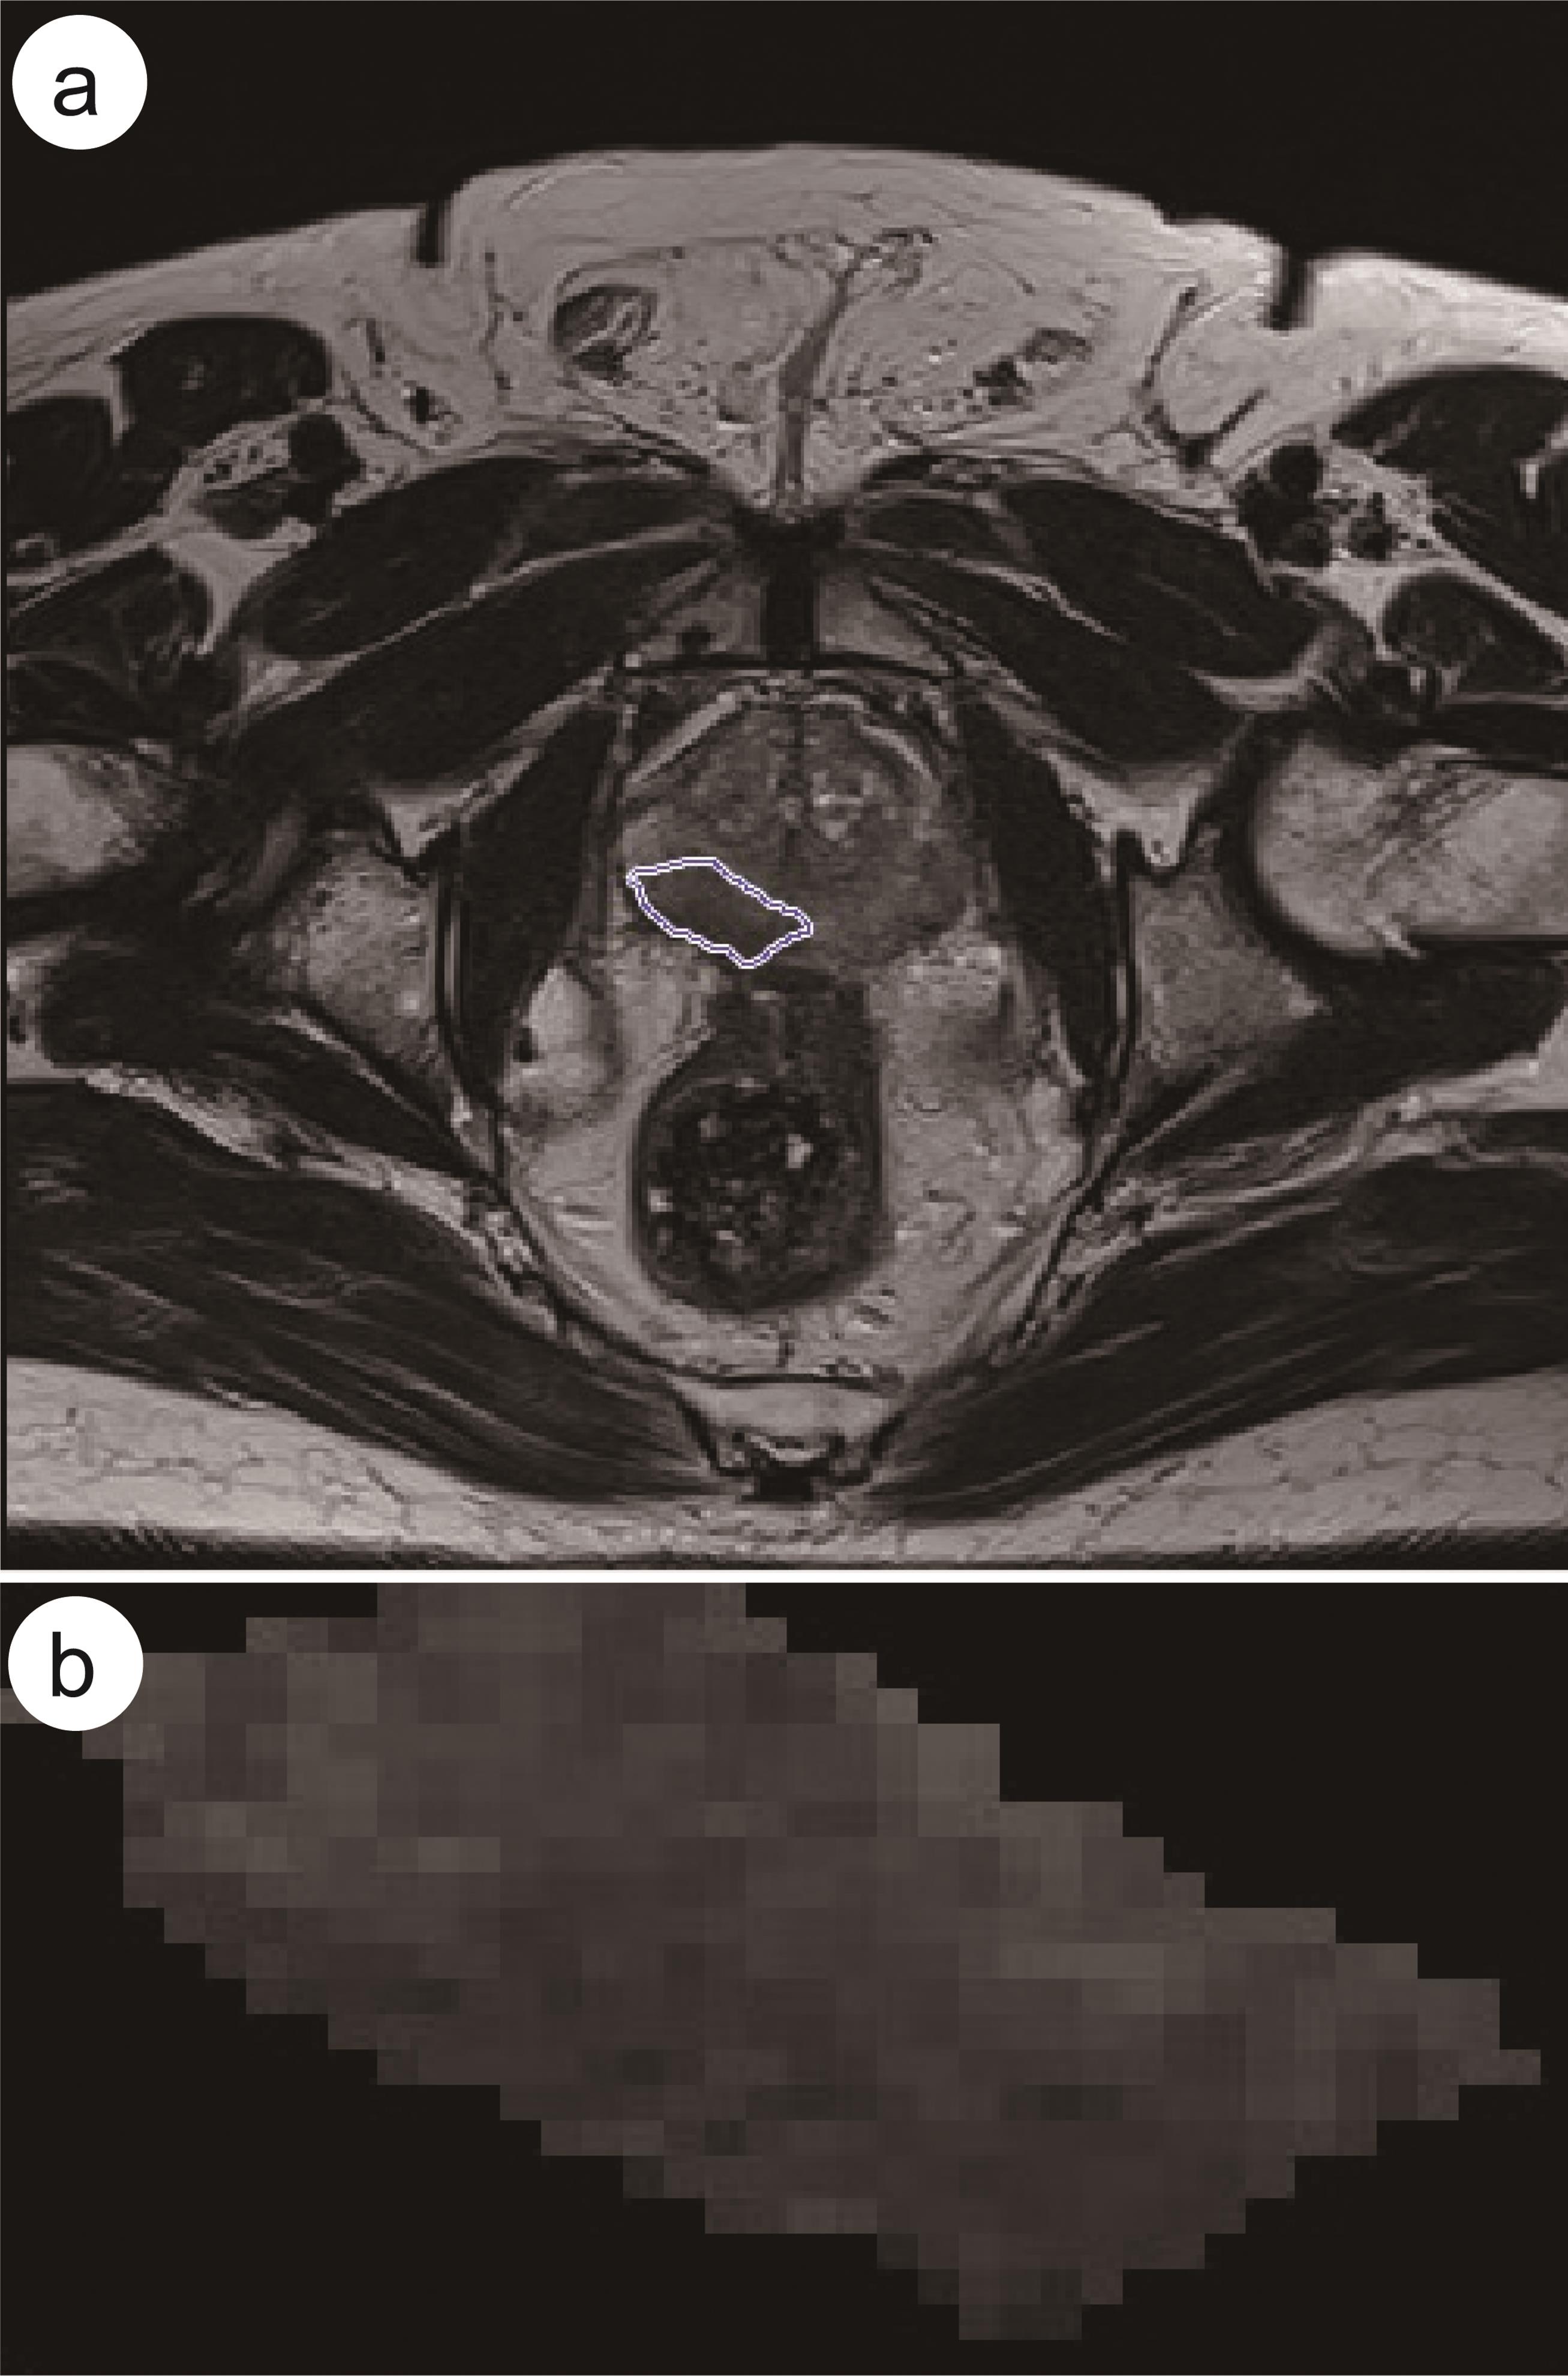 Prostate MR image of a 70-year-old cancer patient with a Gleason score 9 (4 + 5) and stage 3 (Case 1): (a) outlined with a freehand ROI tool on T2 WMR sequence; and (b) cropped ROI (22 × 38 pixels).